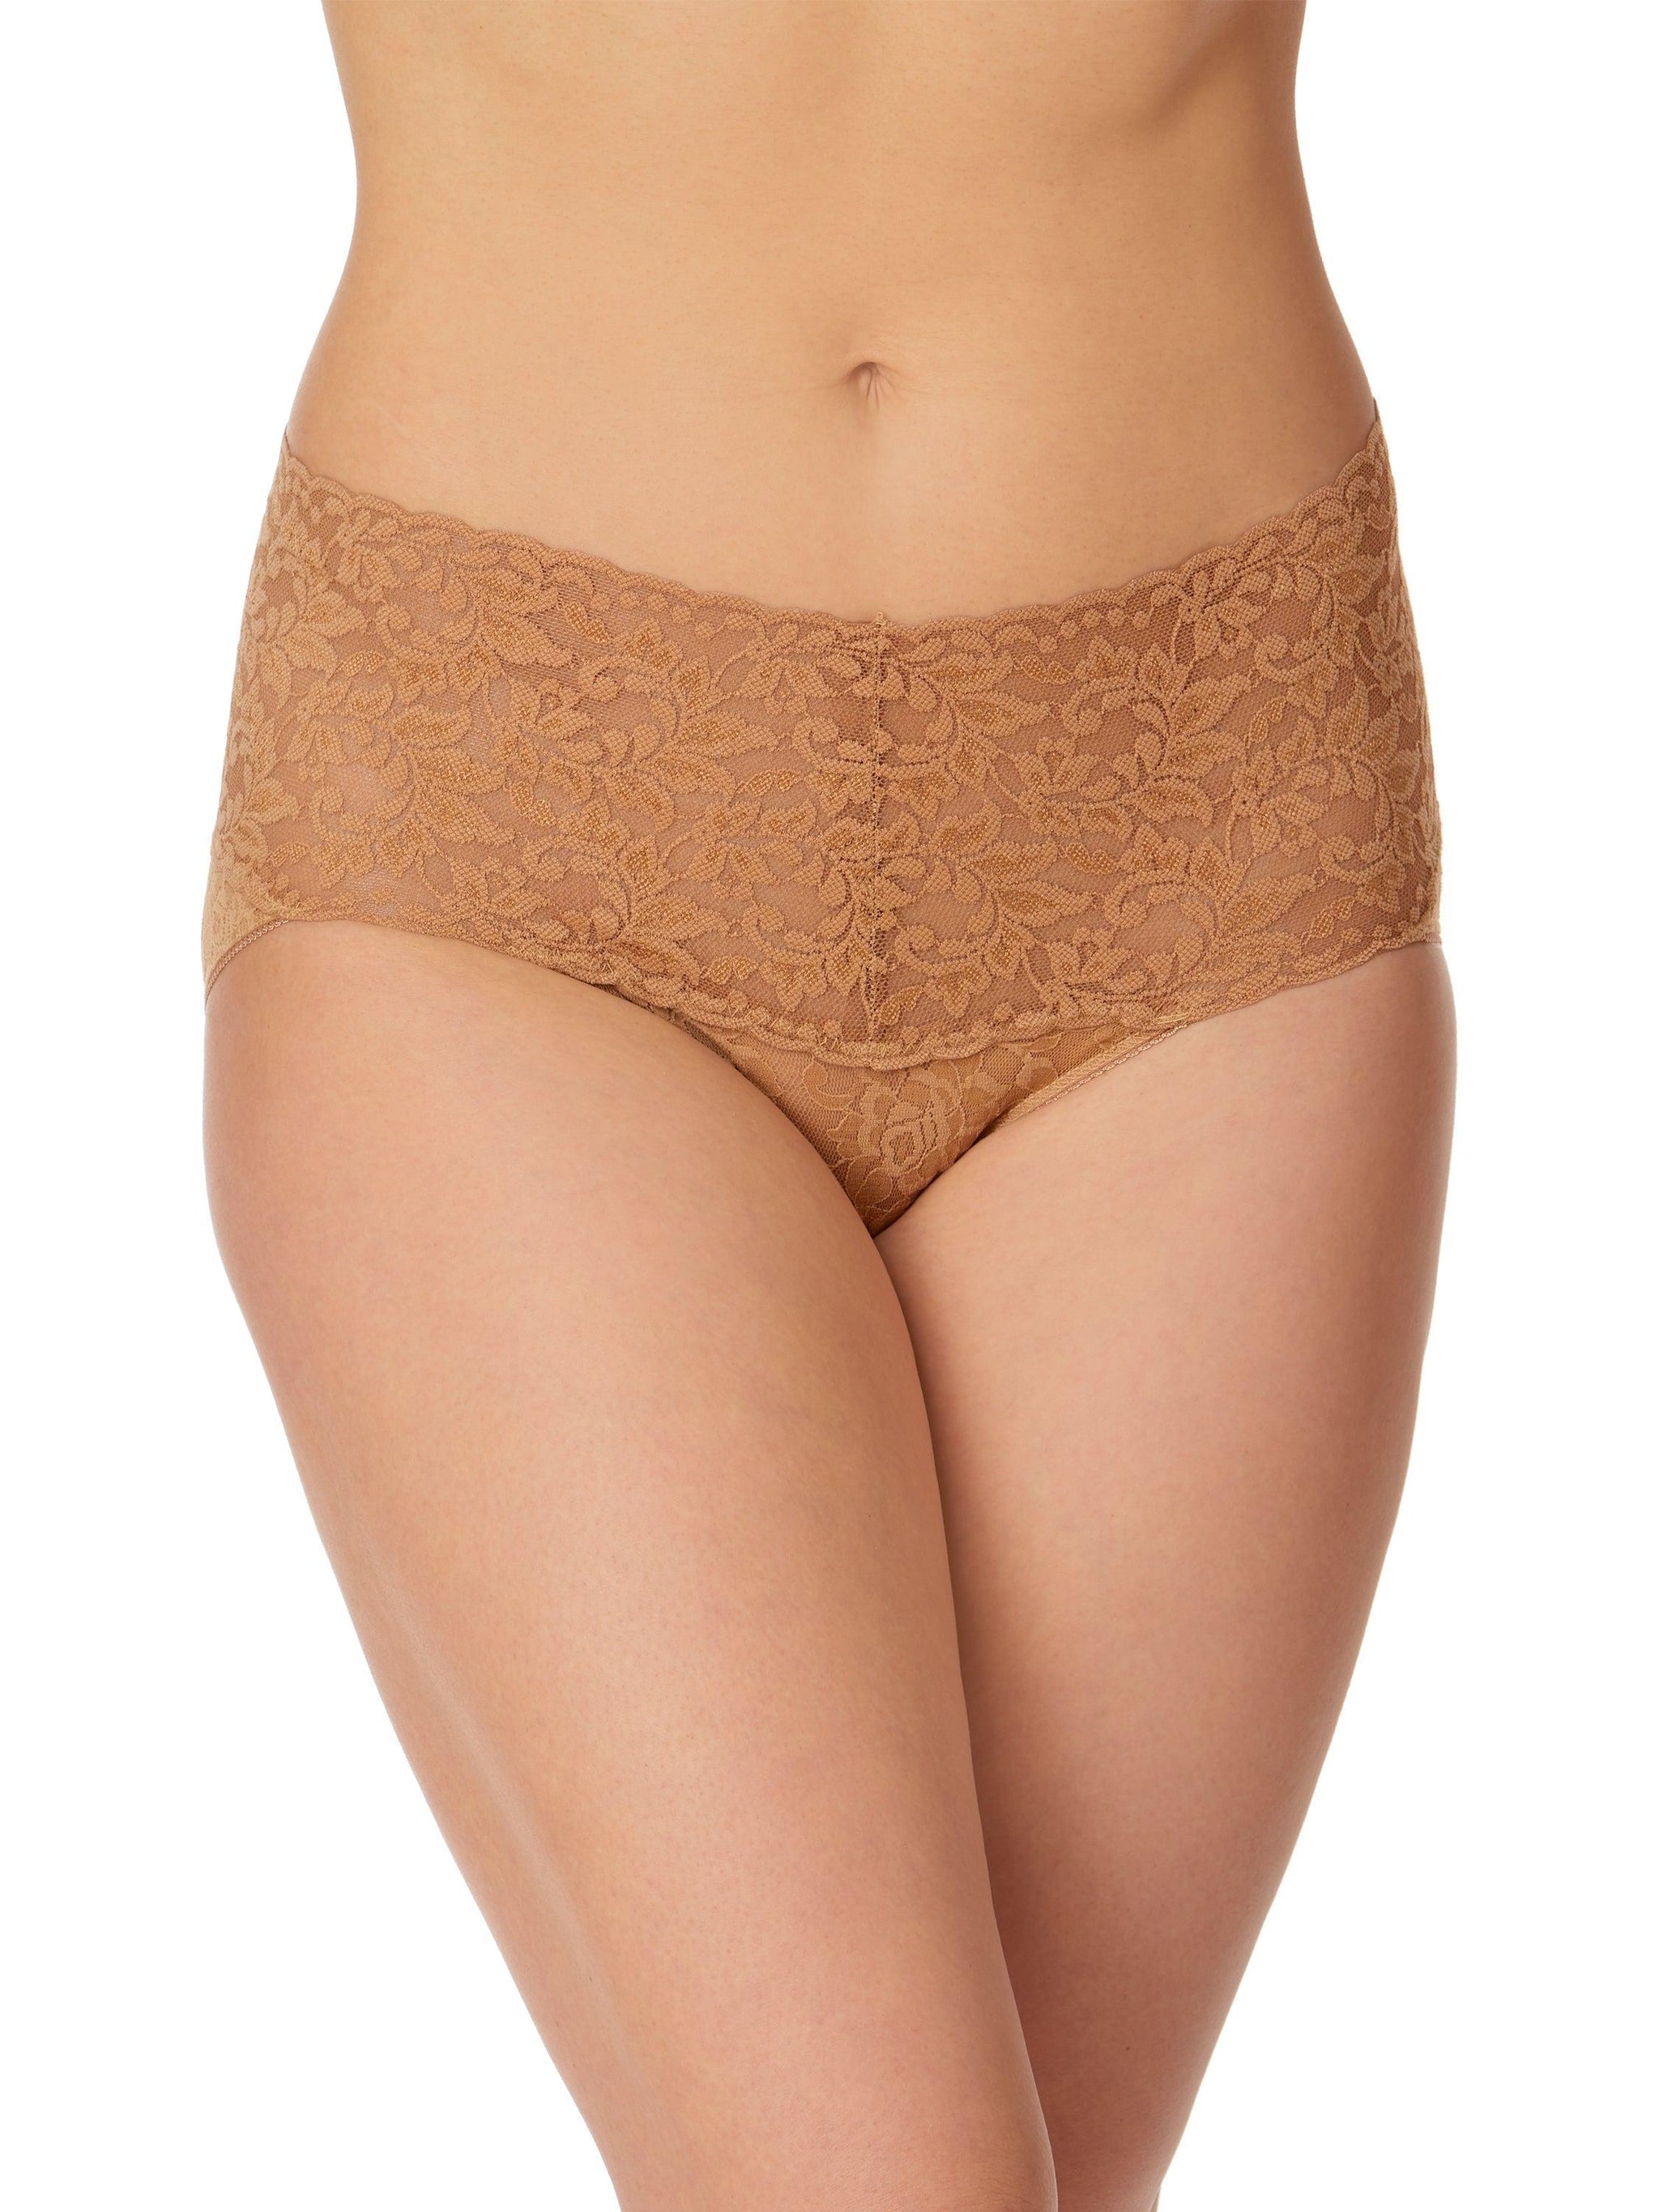 Retro Y-lined Floral Lace Brassiere with High Waist Panties+ Garters a –  NaughtyTrove